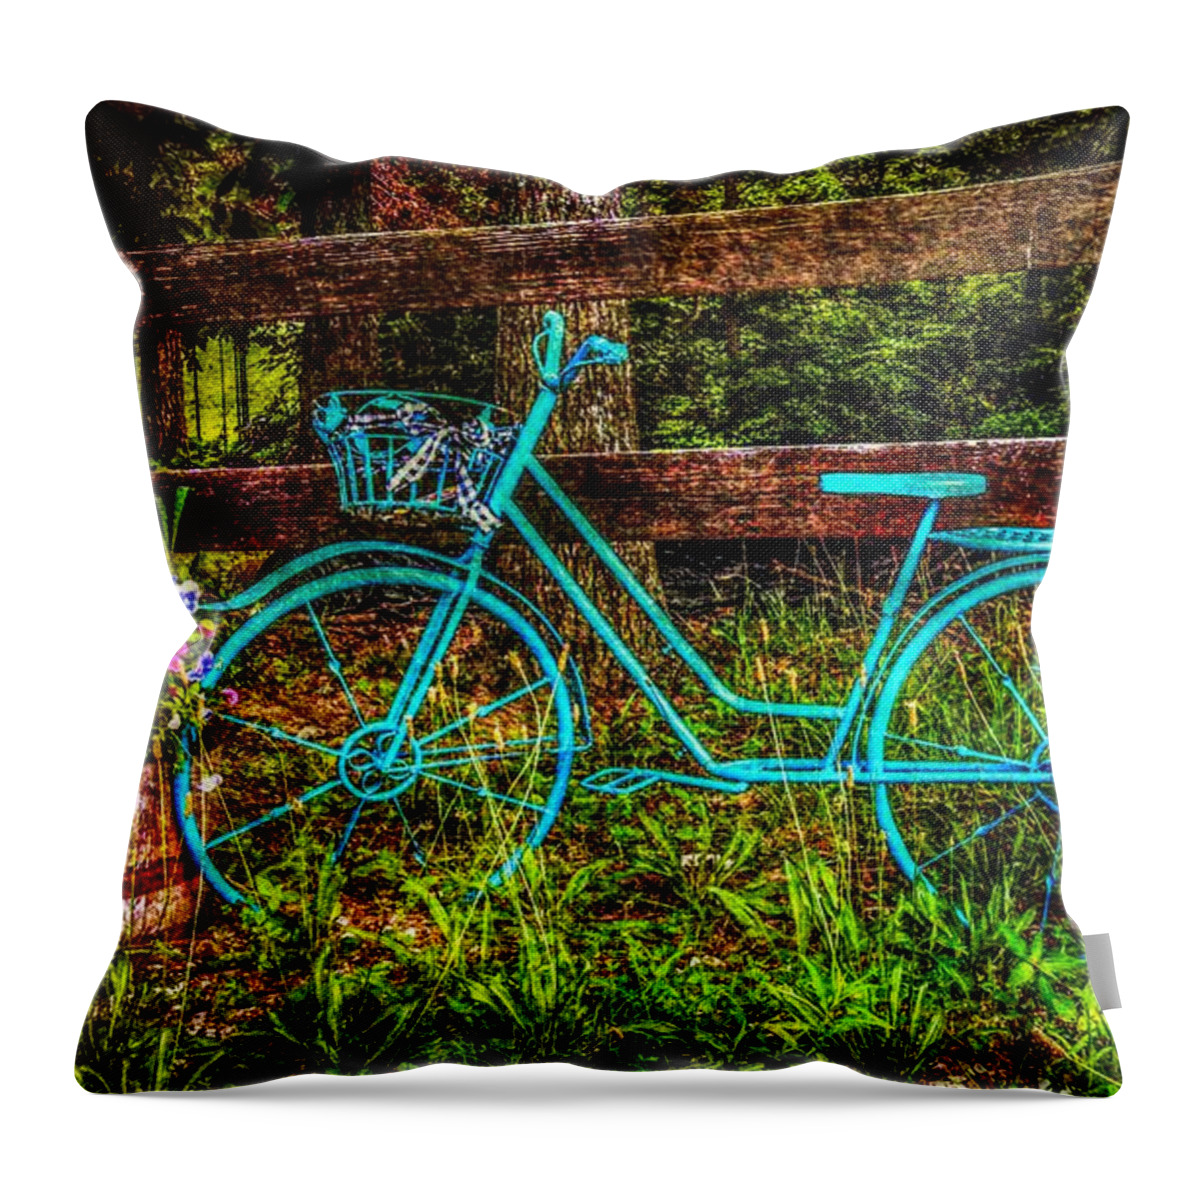 Vintage Blue Bike Throw Pillow featuring the photograph Vintage Summertime Blue Bike by Peggy Franz